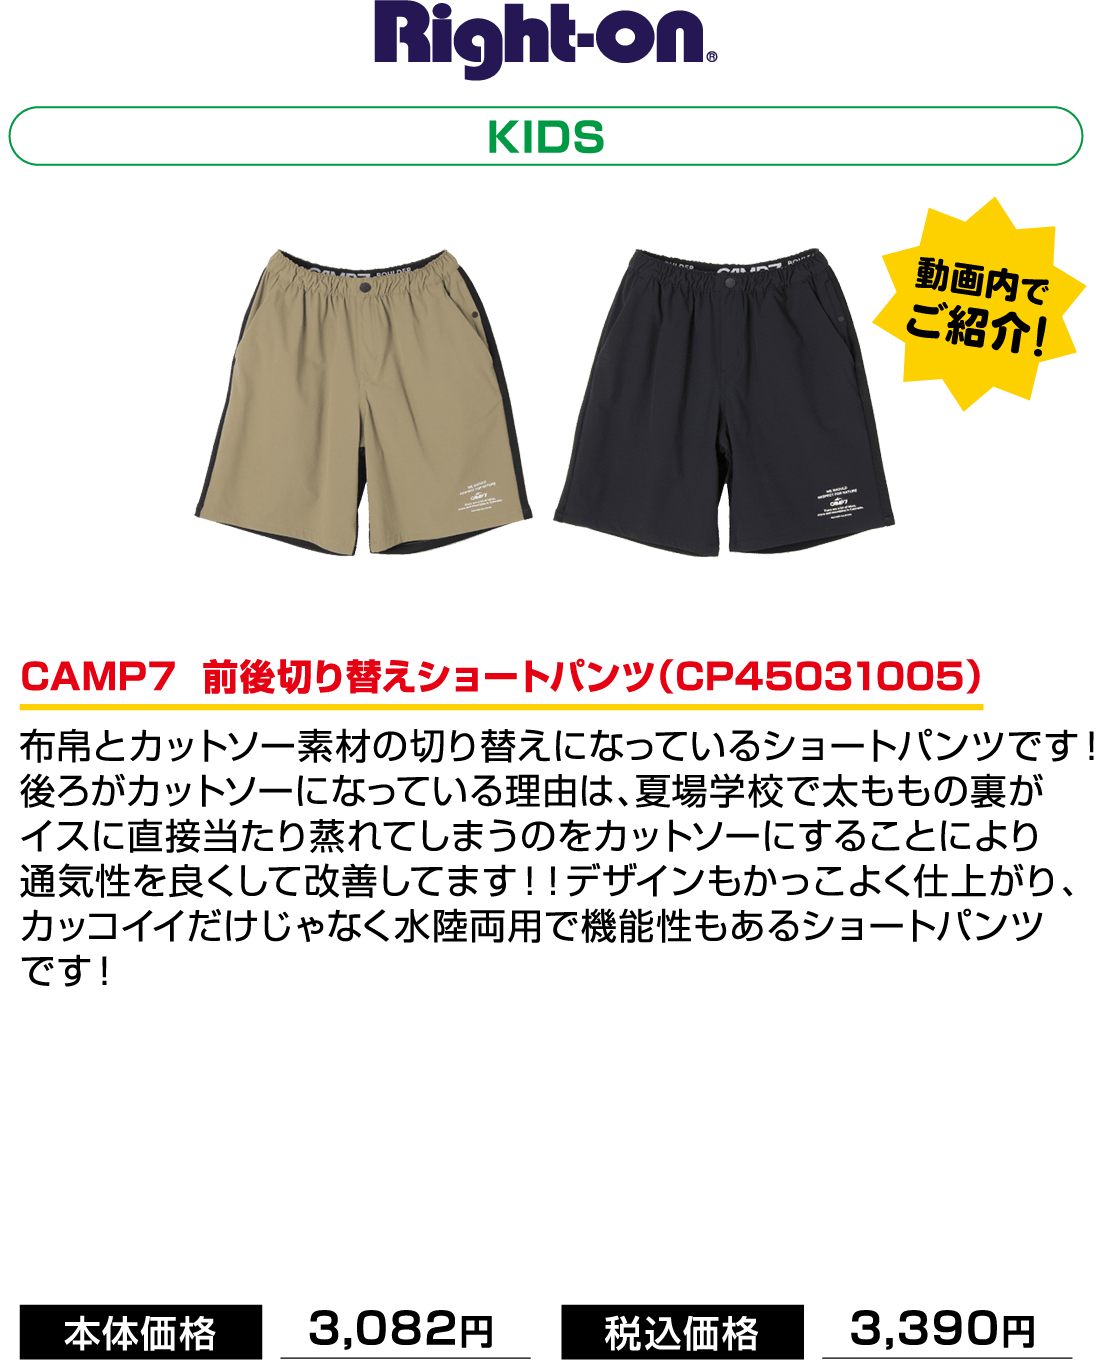 Right-on KIDS CAMP7  前後切り替えショートパンツ（CP45031005）